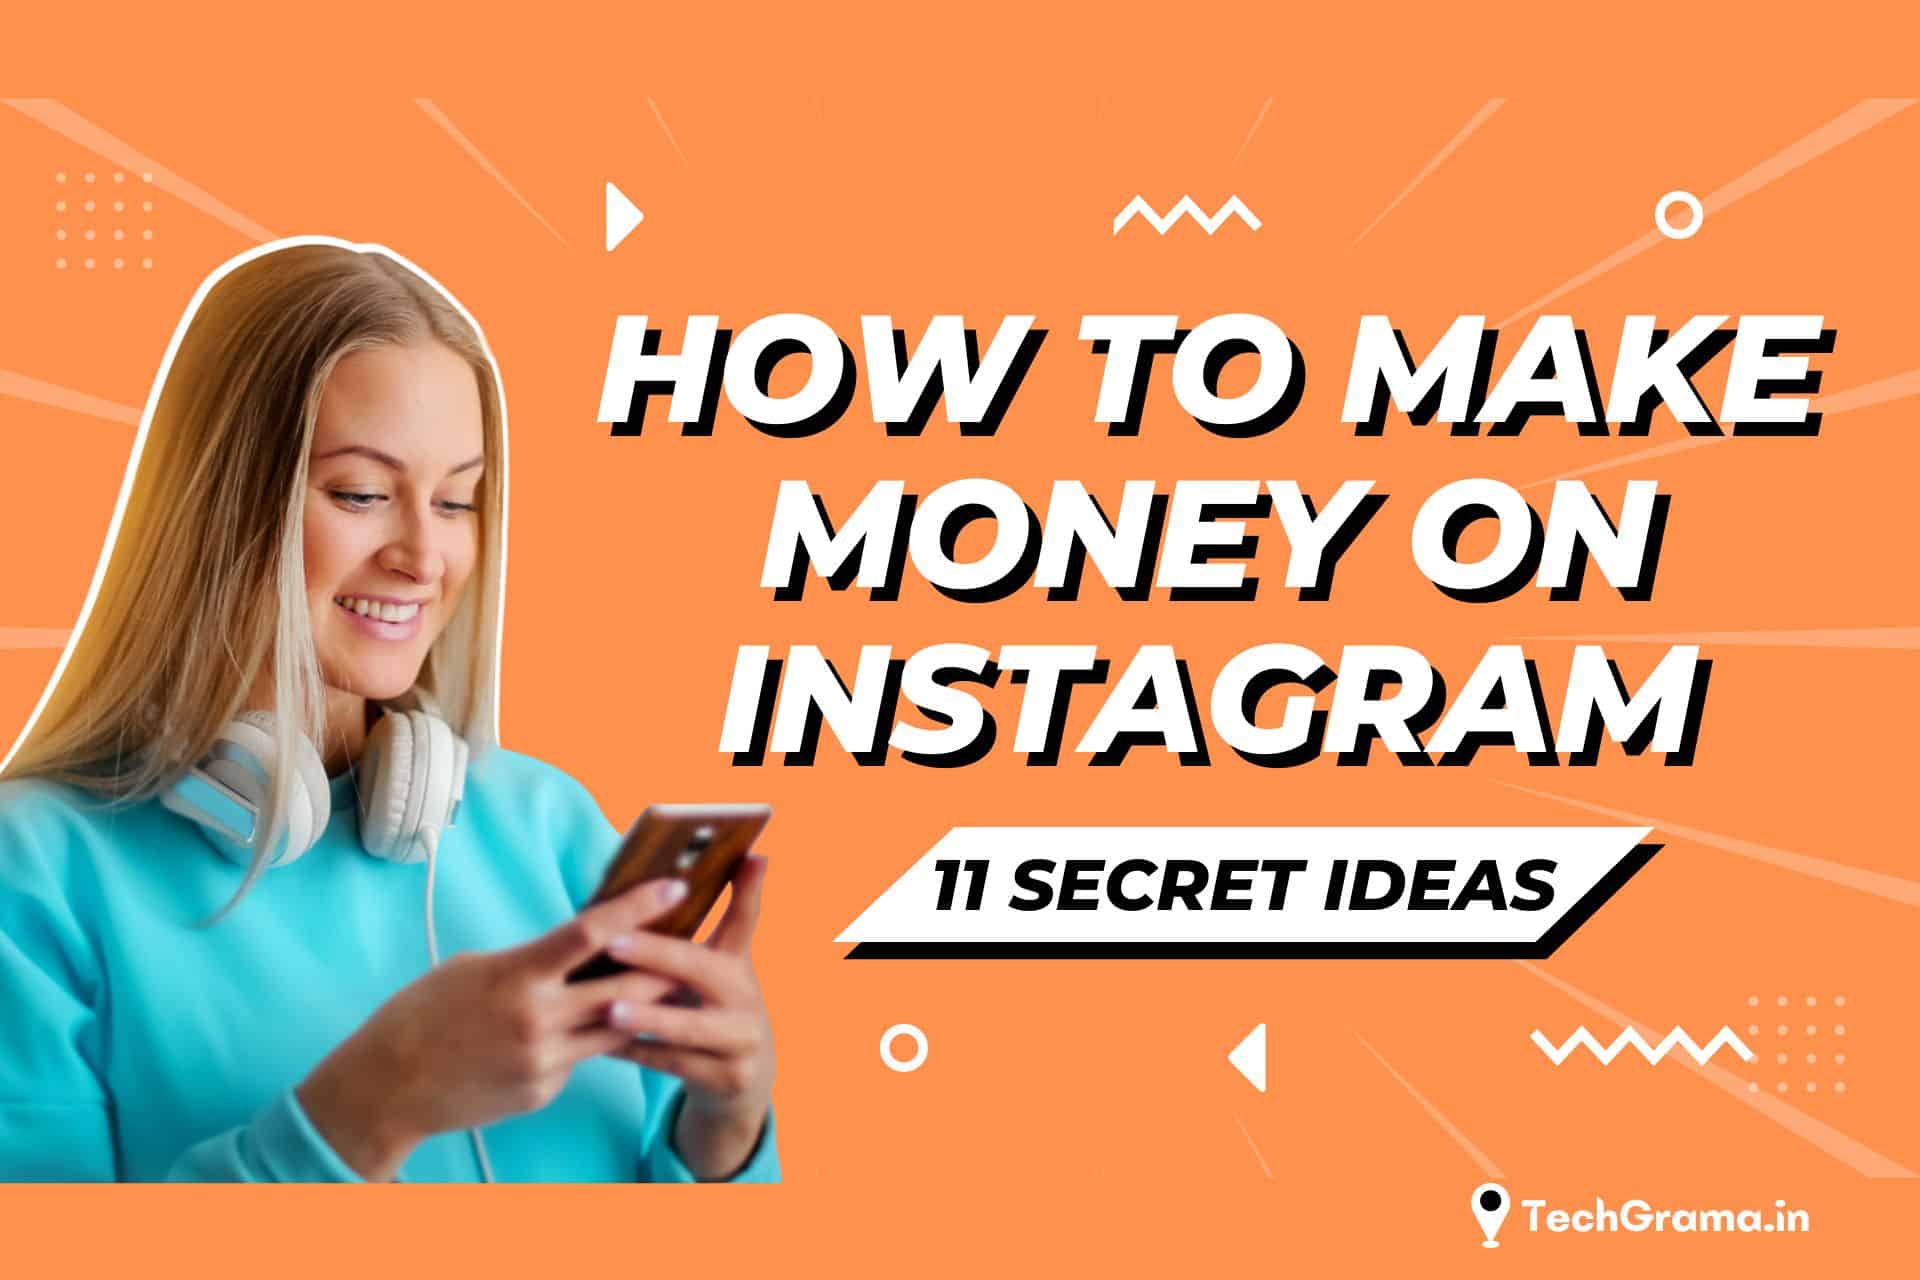 Make Money On Instagram, how to make money on instagram without followers